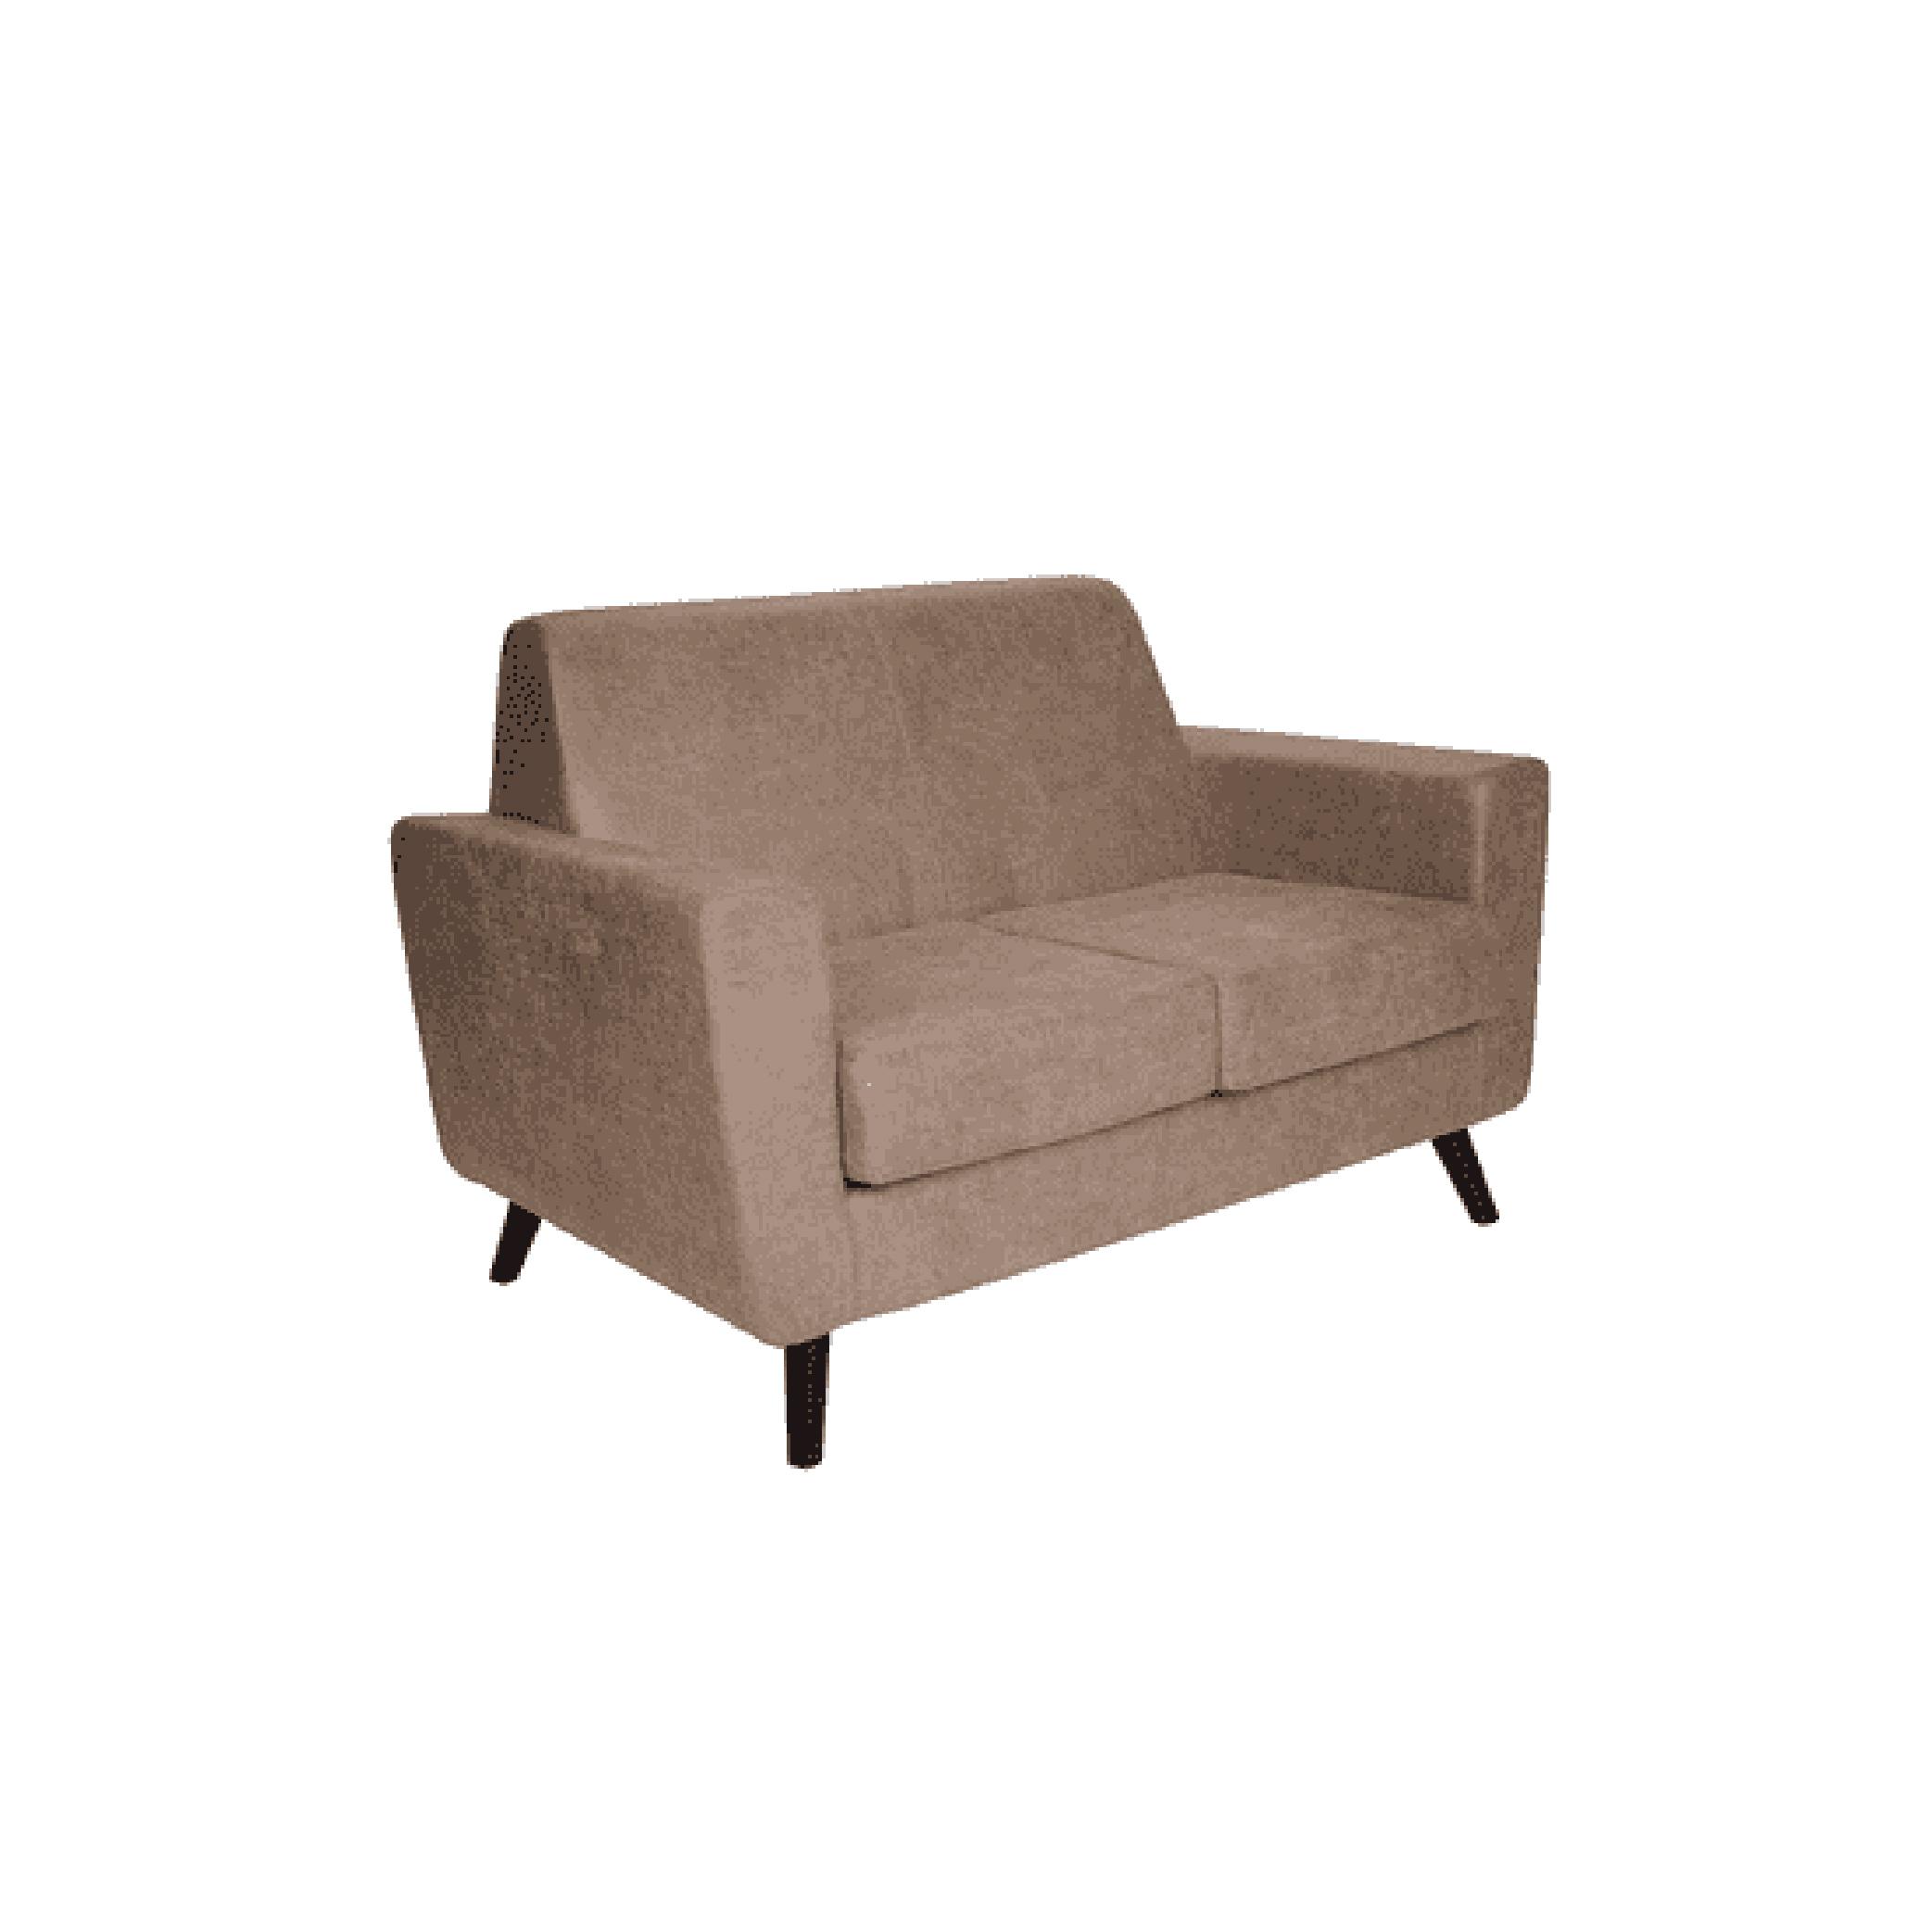 Greco Two Seater Sofa in Beige Colour